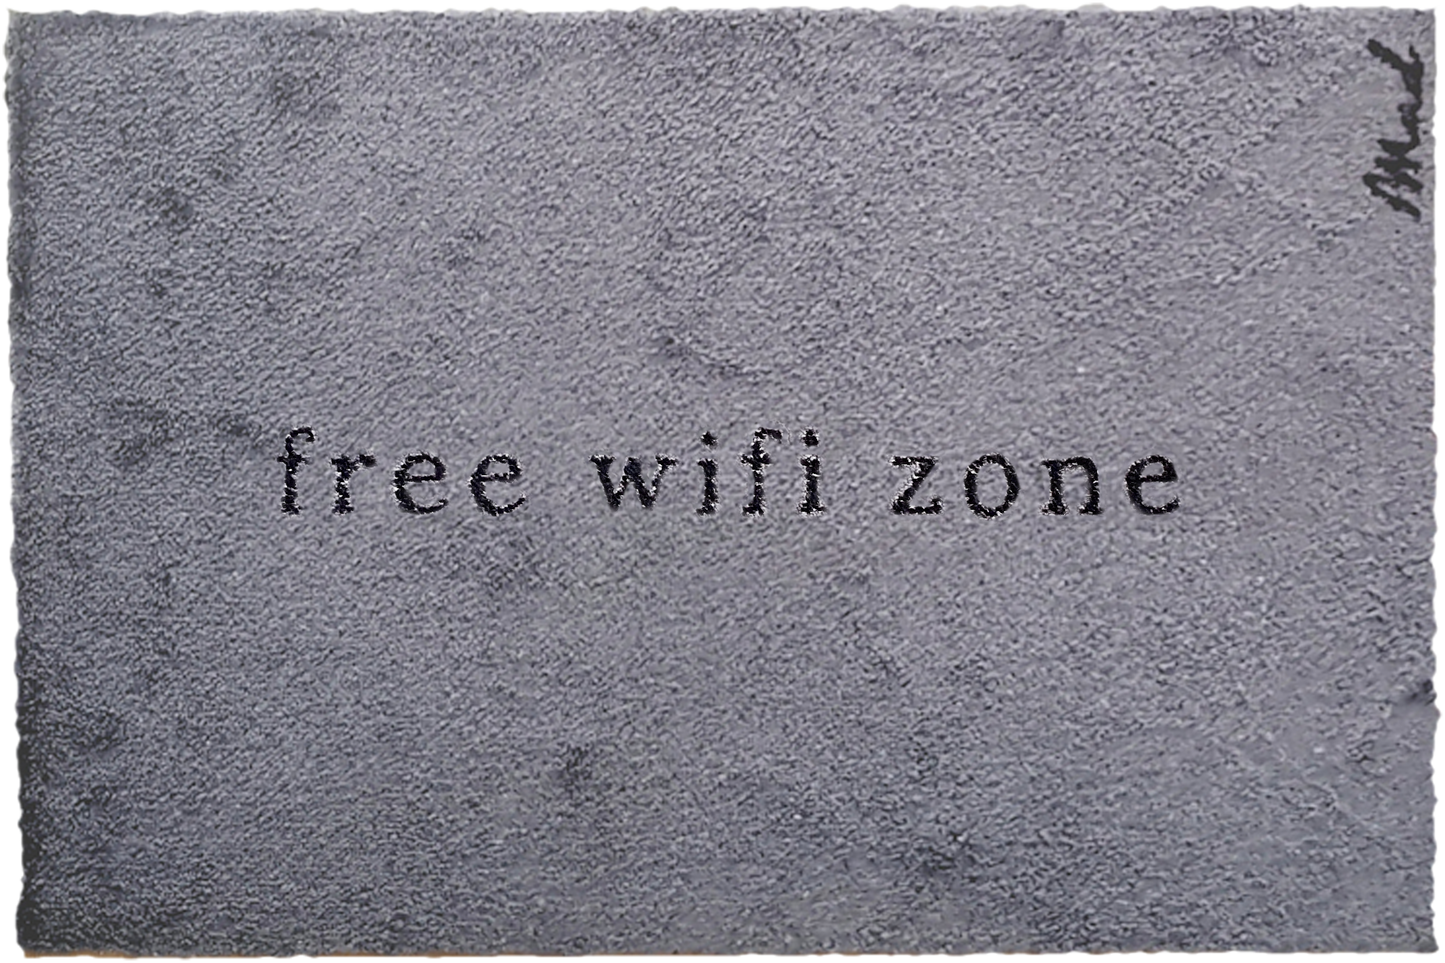 Mad about Mats "Free wifi zone"